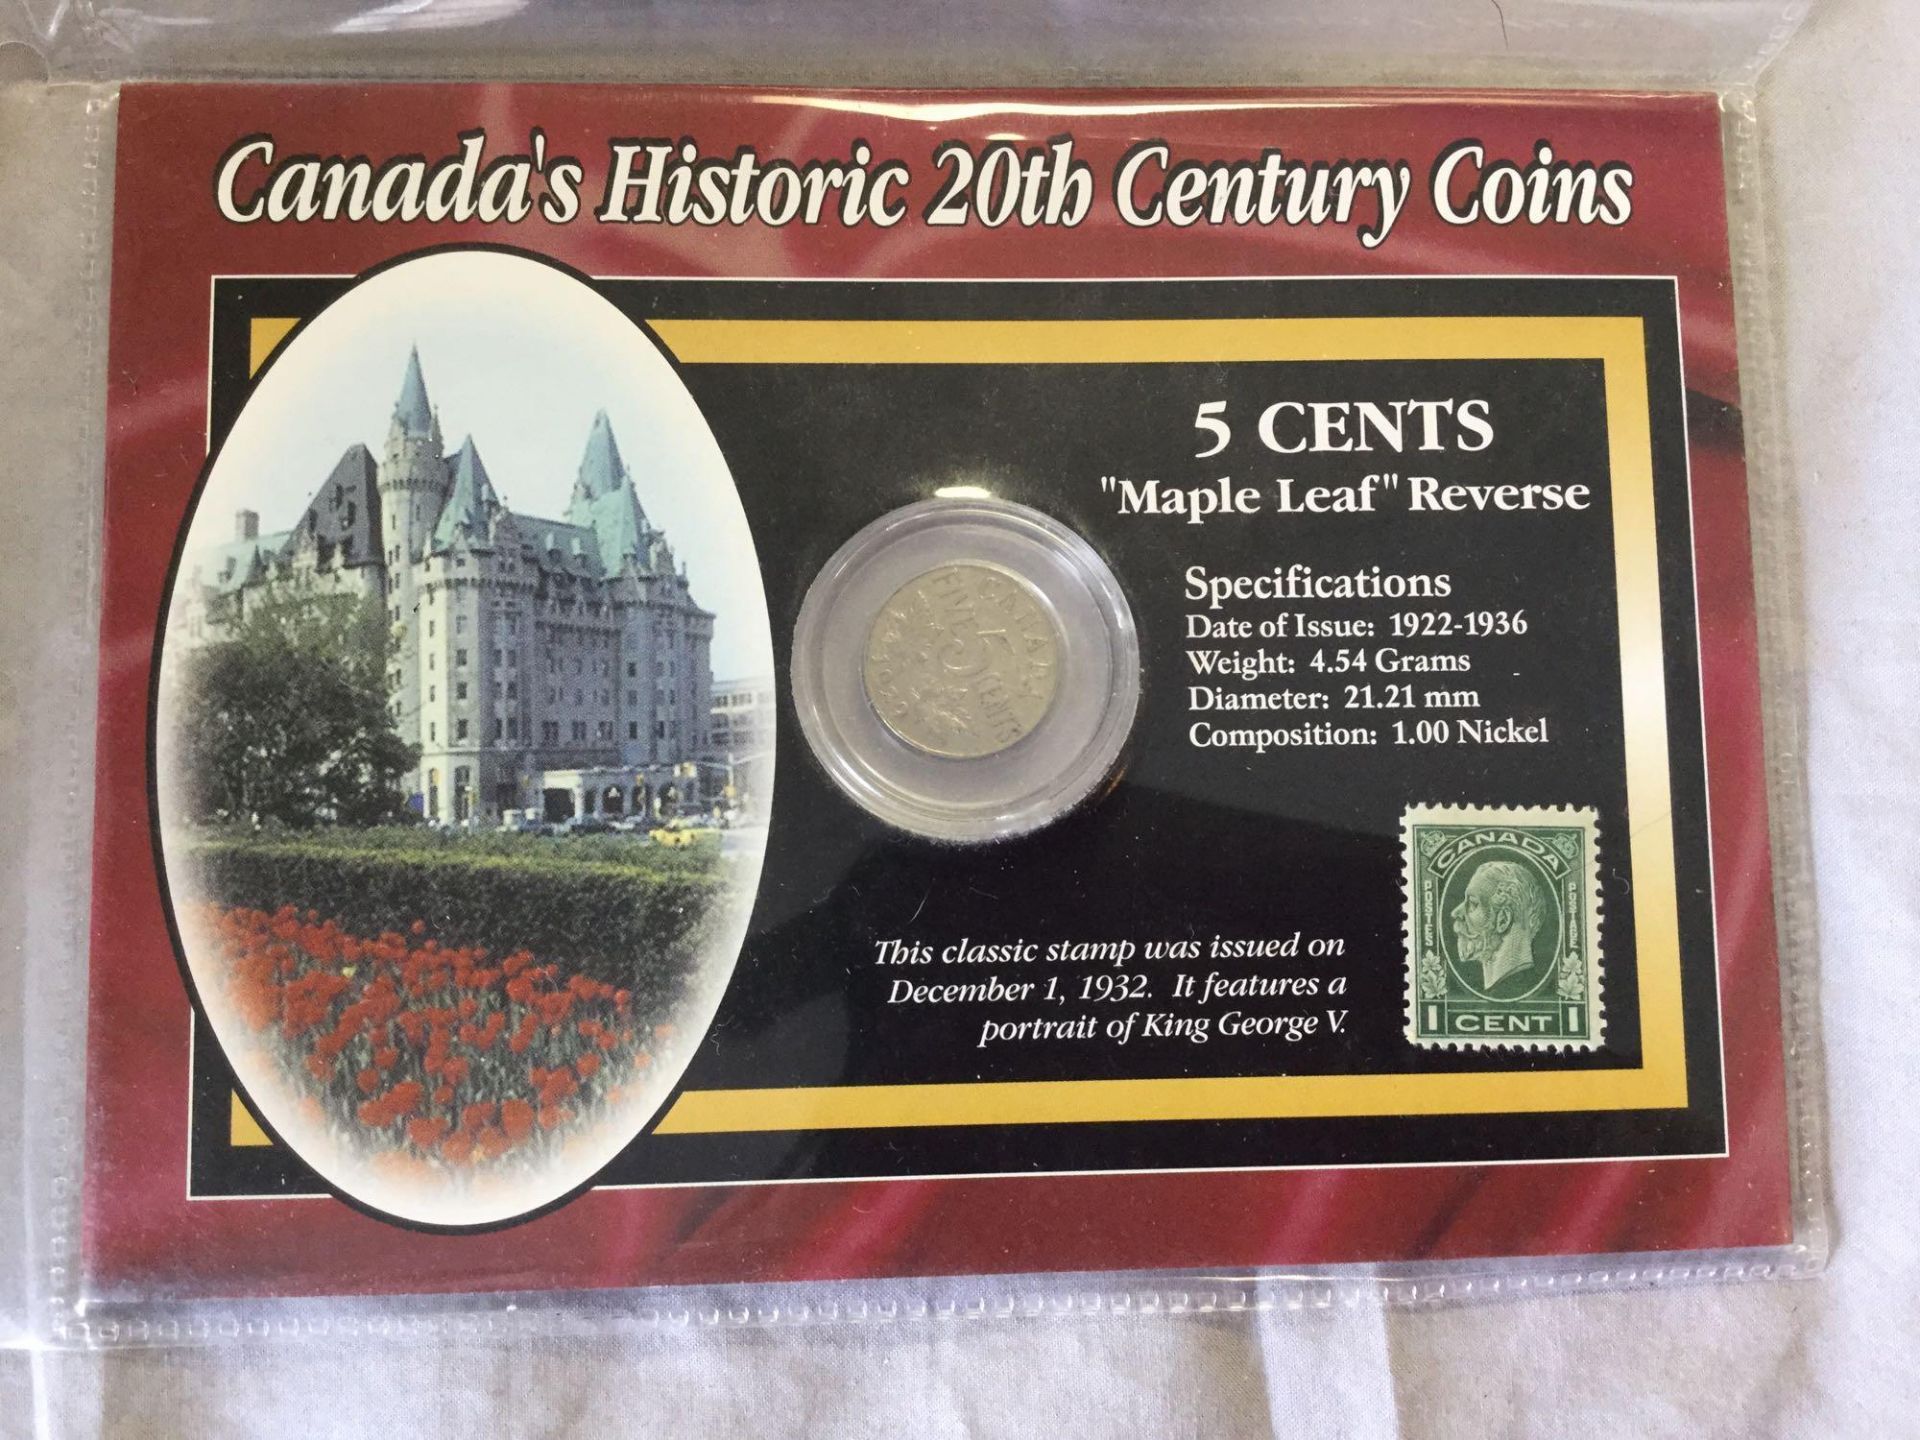 Canada's Historic 20th Century Coins - 5 Cent Maple Leaf coin - Image 2 of 3